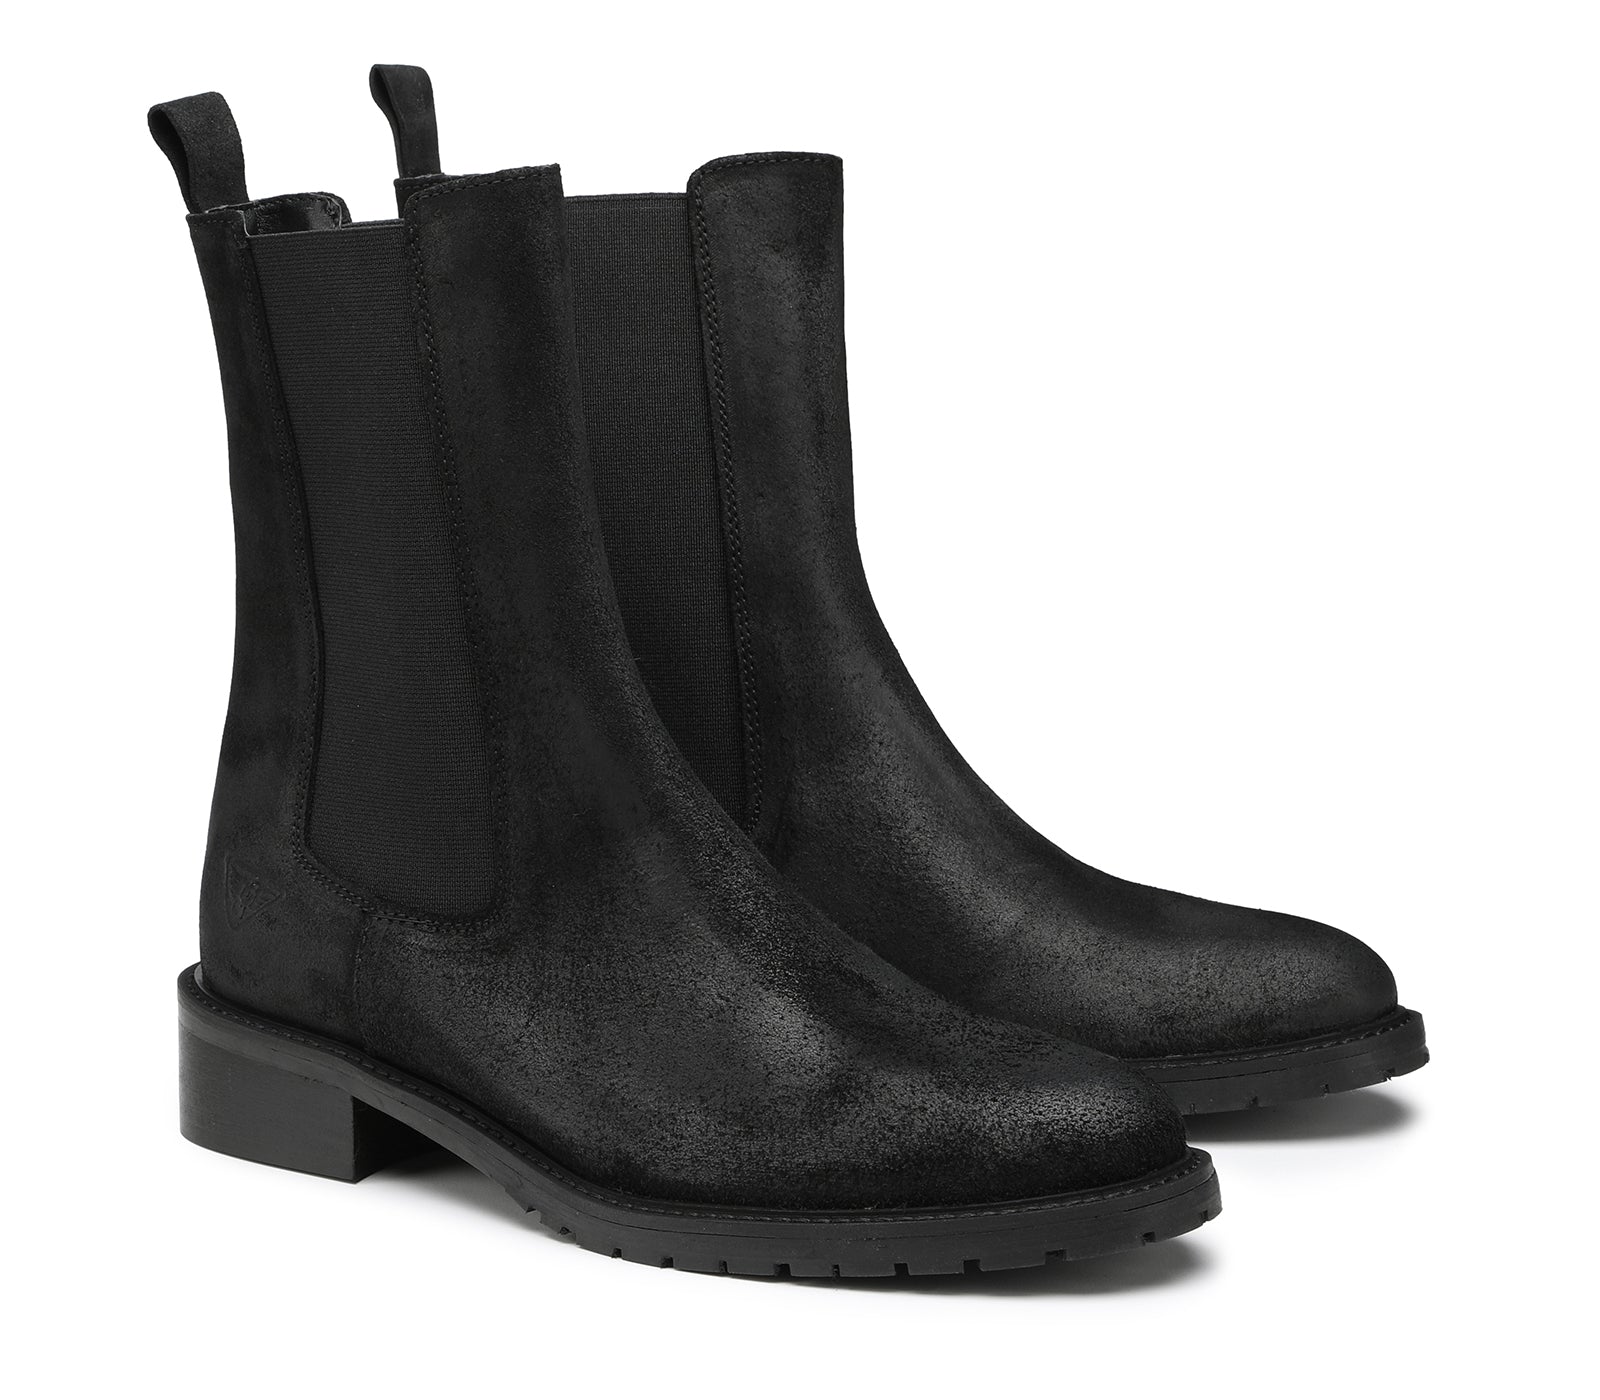 Women's Chelsea Ankle Boots in Black Leather with Elasticized Inserts